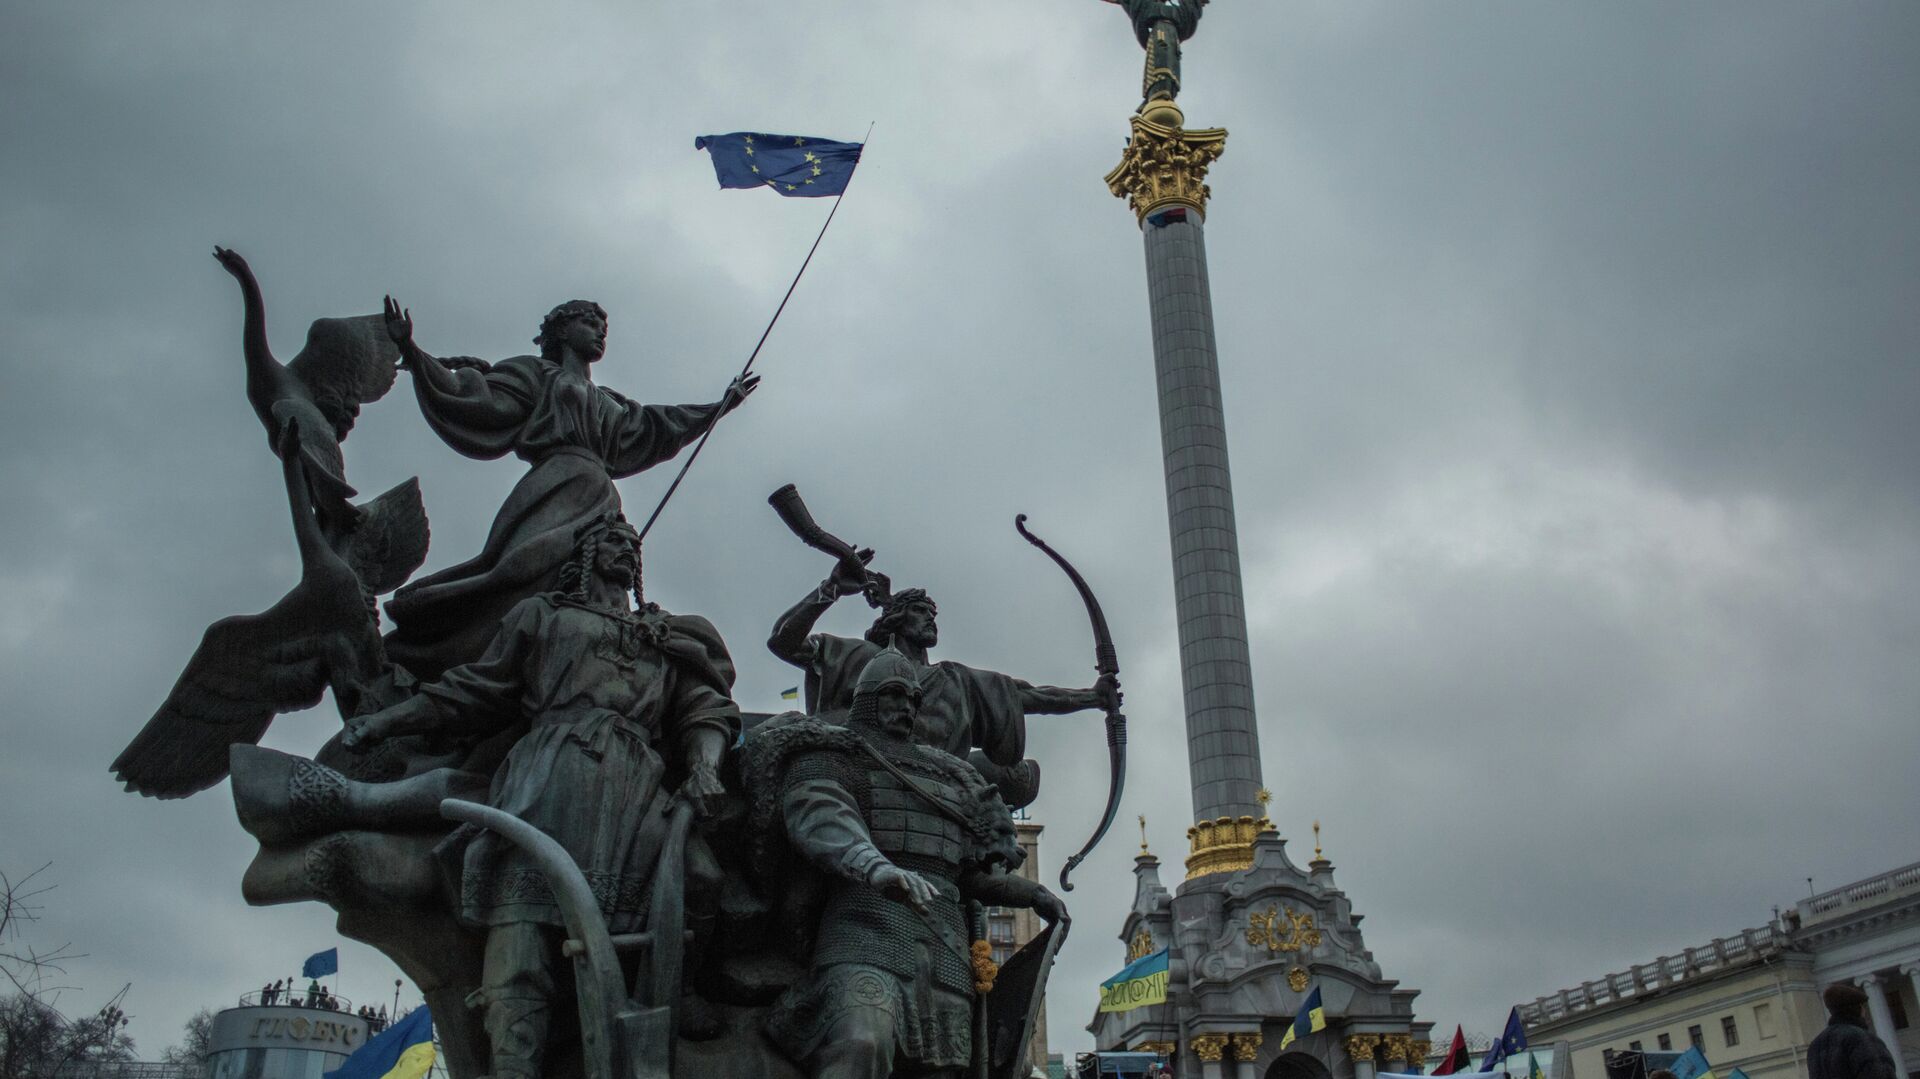 Rally to support Ukraine's integration with Europe on Independence Square, Kiev. (File photo) - Sputnik International, 1920, 09.12.2021